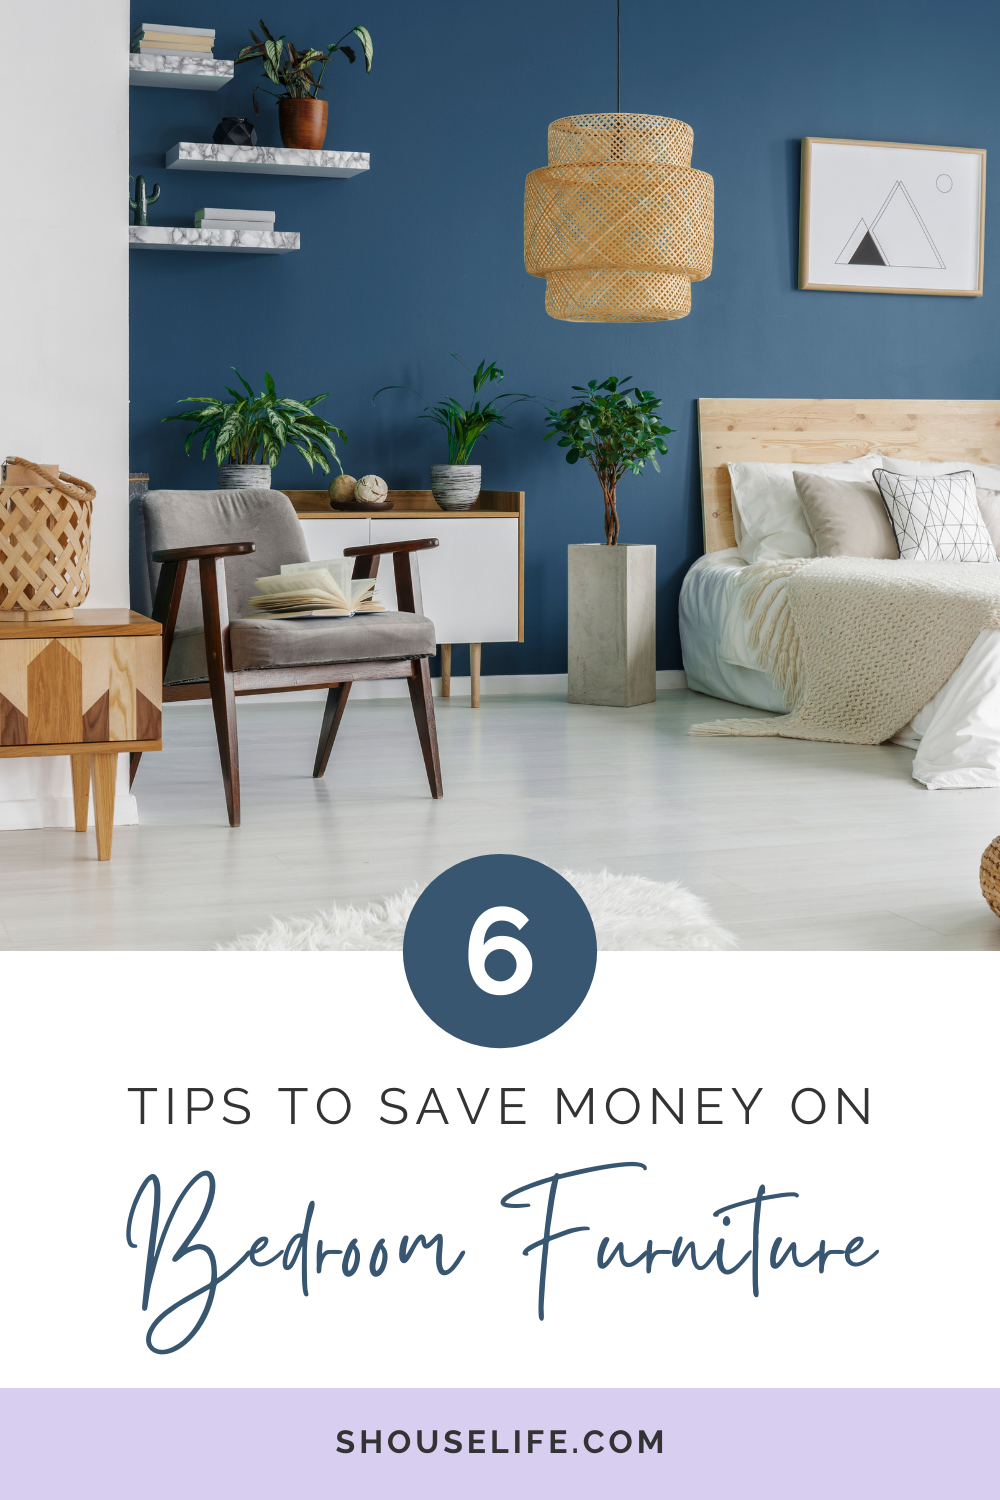 6 Tips To Save Money On Bedroom Furniture